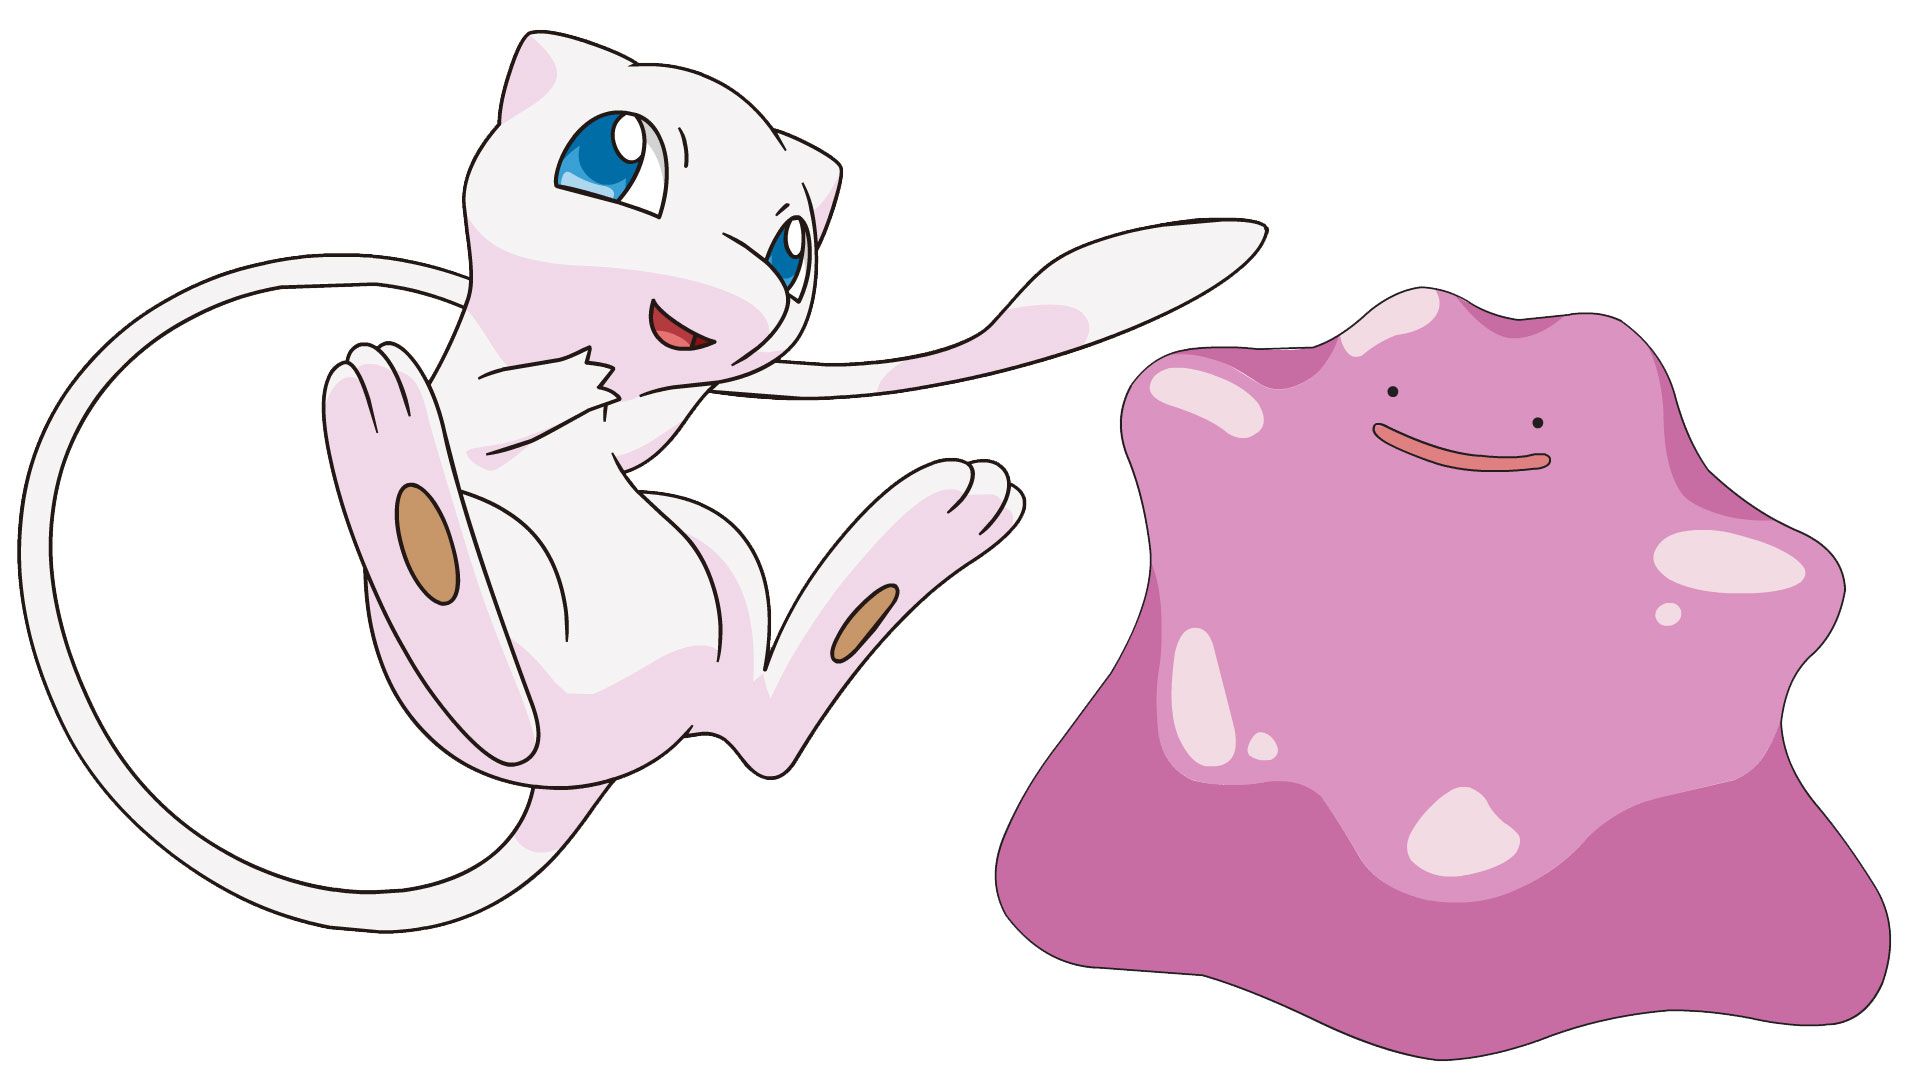 Is Mew a Ditto?